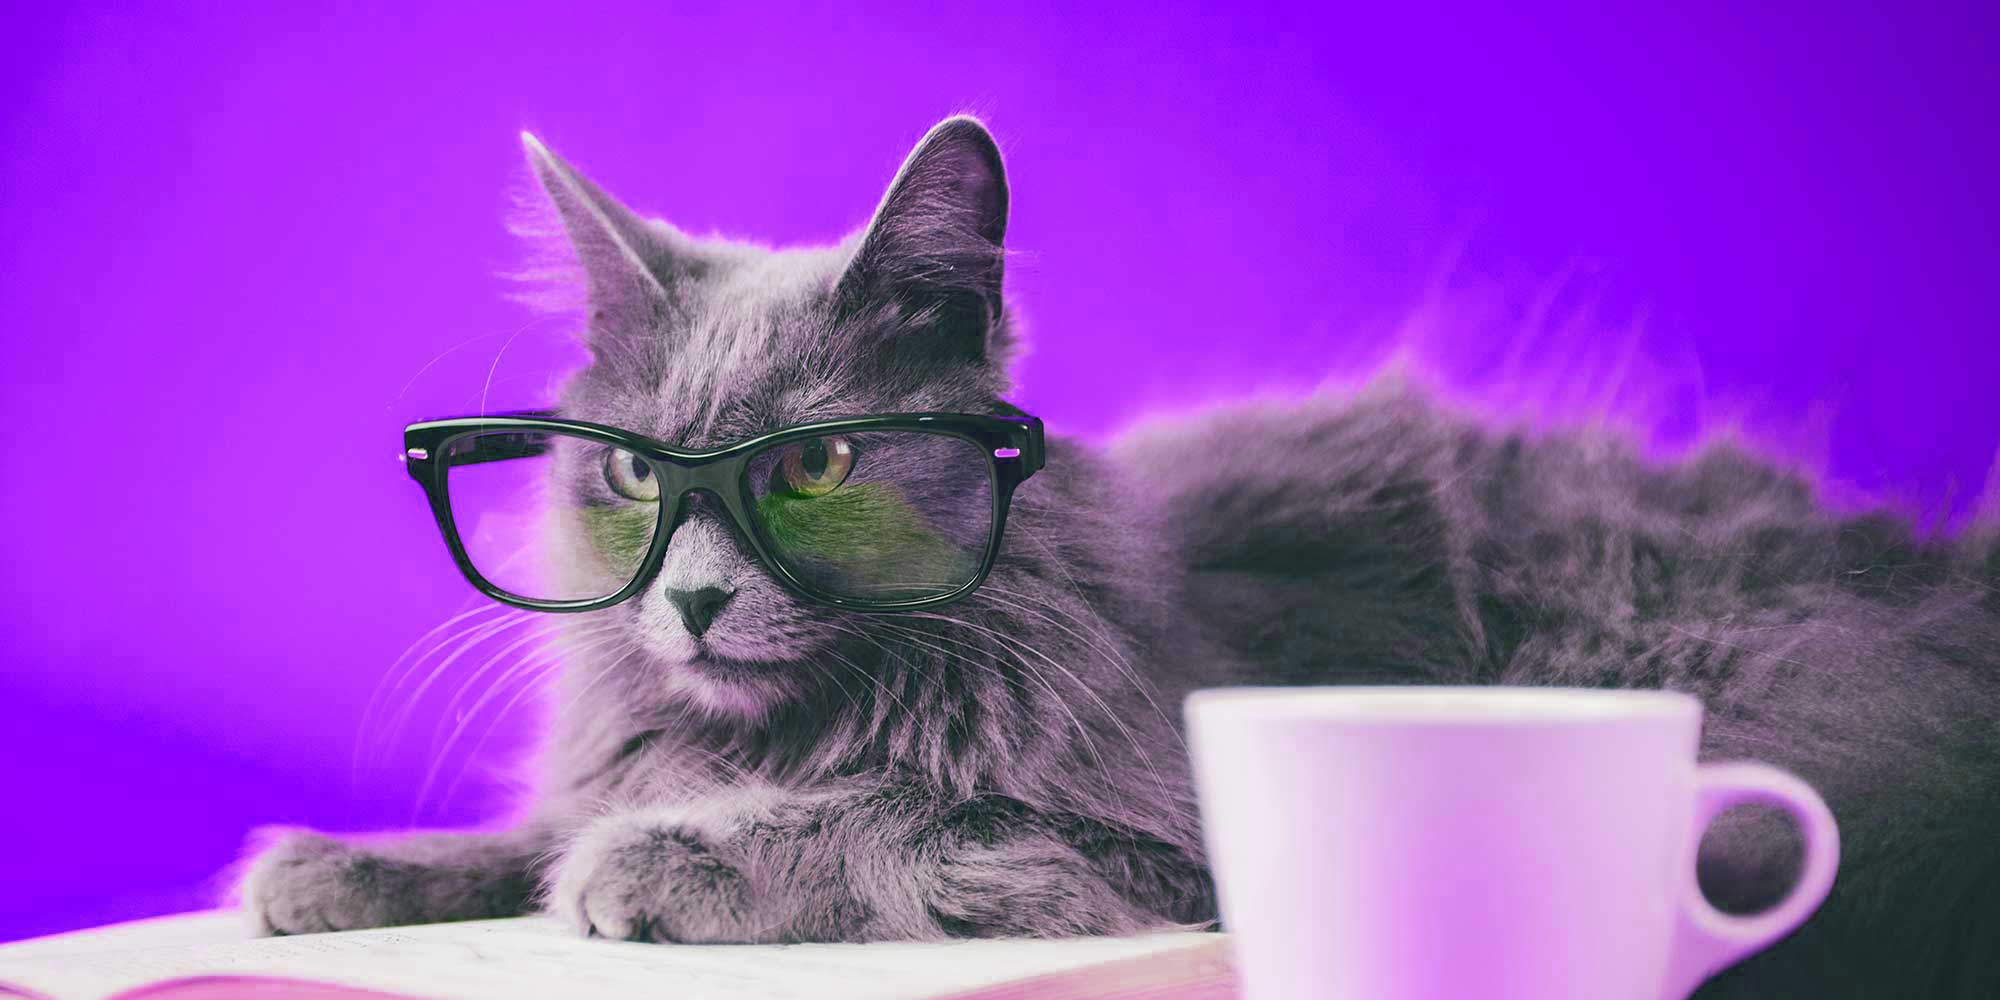 A grey cat wearing spectacles